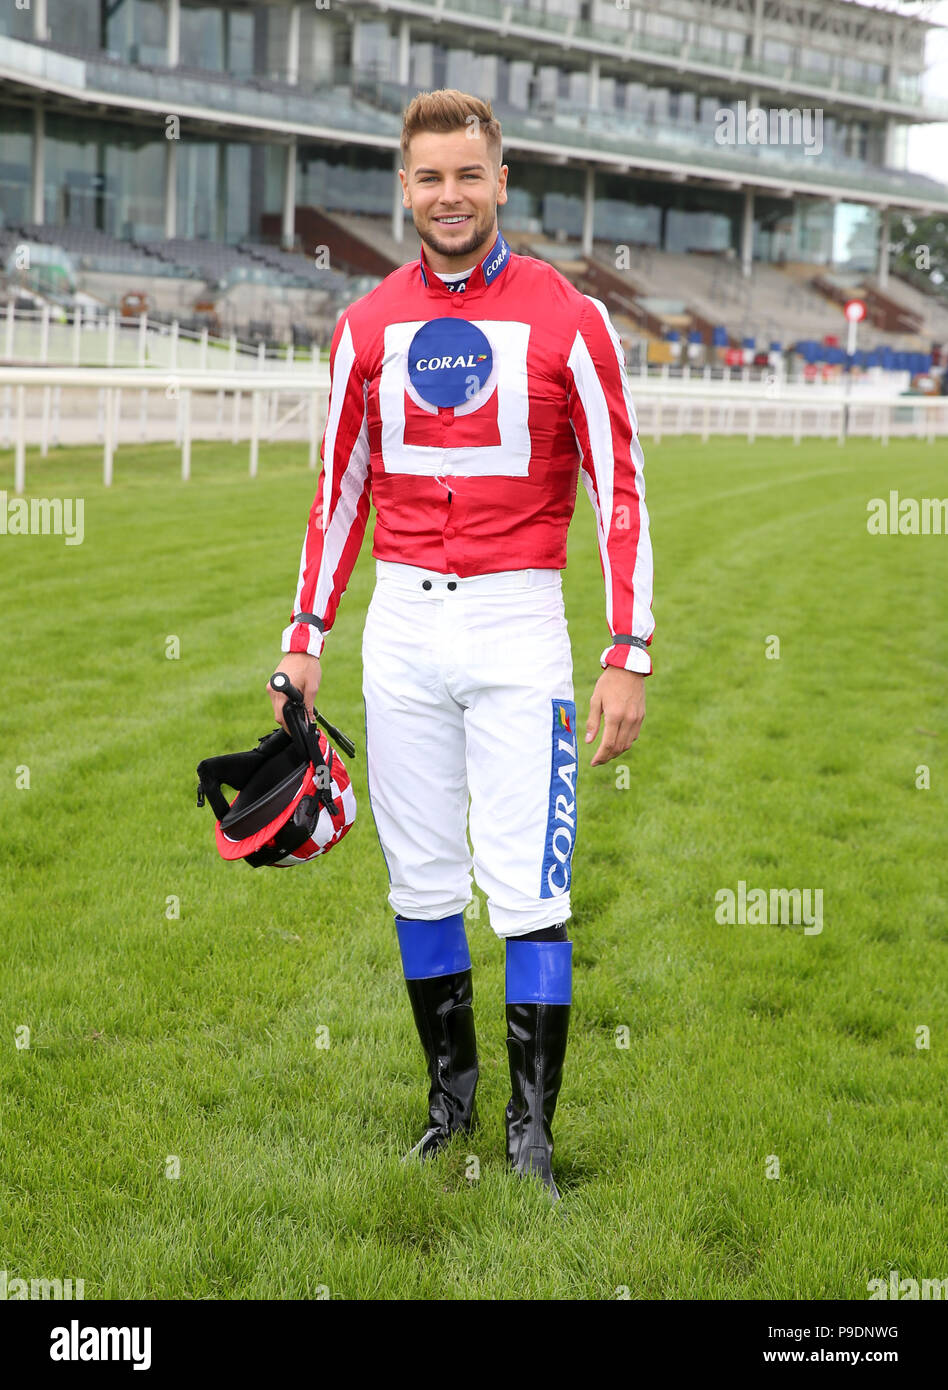 Love Island star Chris Hughes makes his debut as a jockey in a charity race at York today. Hughes, who is Coral’s #LoveRacing ambassador has trained intensely for the last five months with Jonjo O’Neill and will ride Carnageo over one mile and one furlong.LOVE ISLAND’S CHRIS HUGHES 3-1 FAVOURITE TO WIN HORSE RACE   The former Love Island star is well-known as a horse-racing fan and has swapped the suntan lotion for the saddle, having trained intensely for the last five months in partnership with Coral, the bookmakers. The bookies have him down as the 3-1 favourite to win.  The reality TV star  Stock Photo